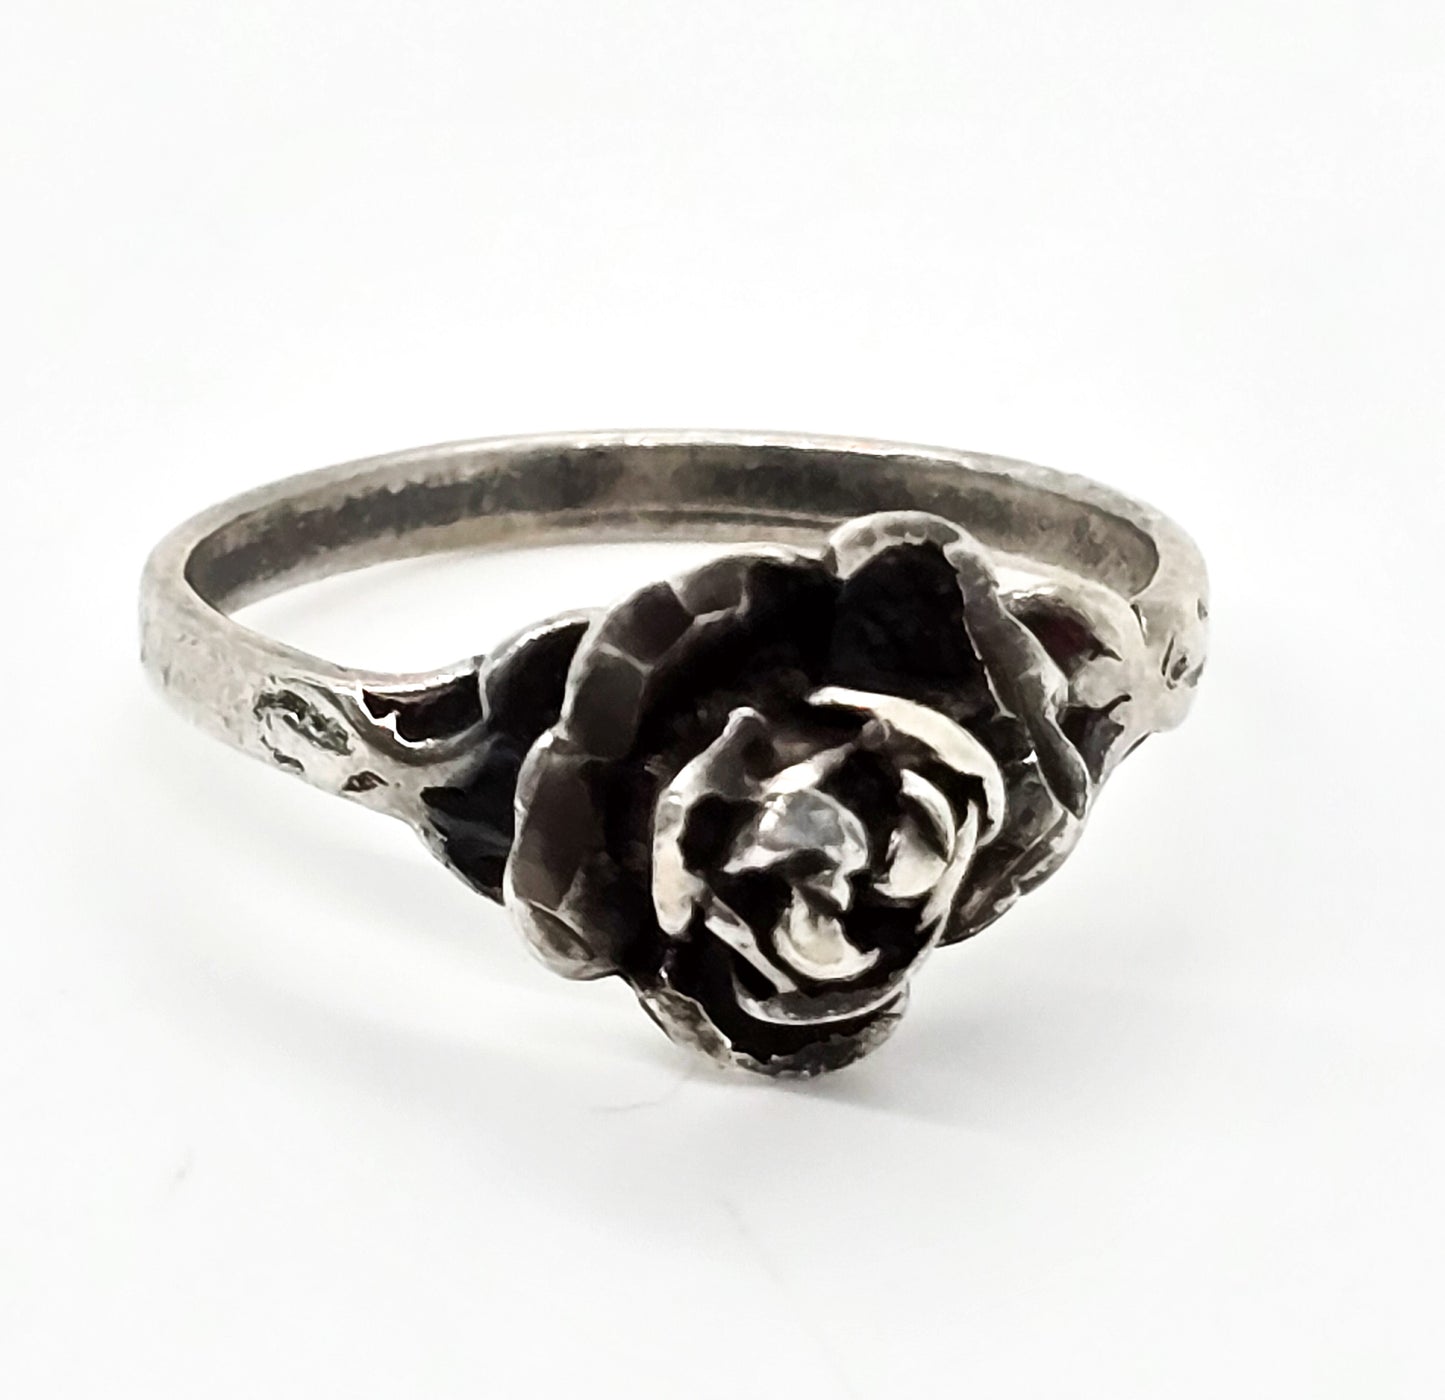 Blooming rose vintage sterling silver flower ring Signed He size 9